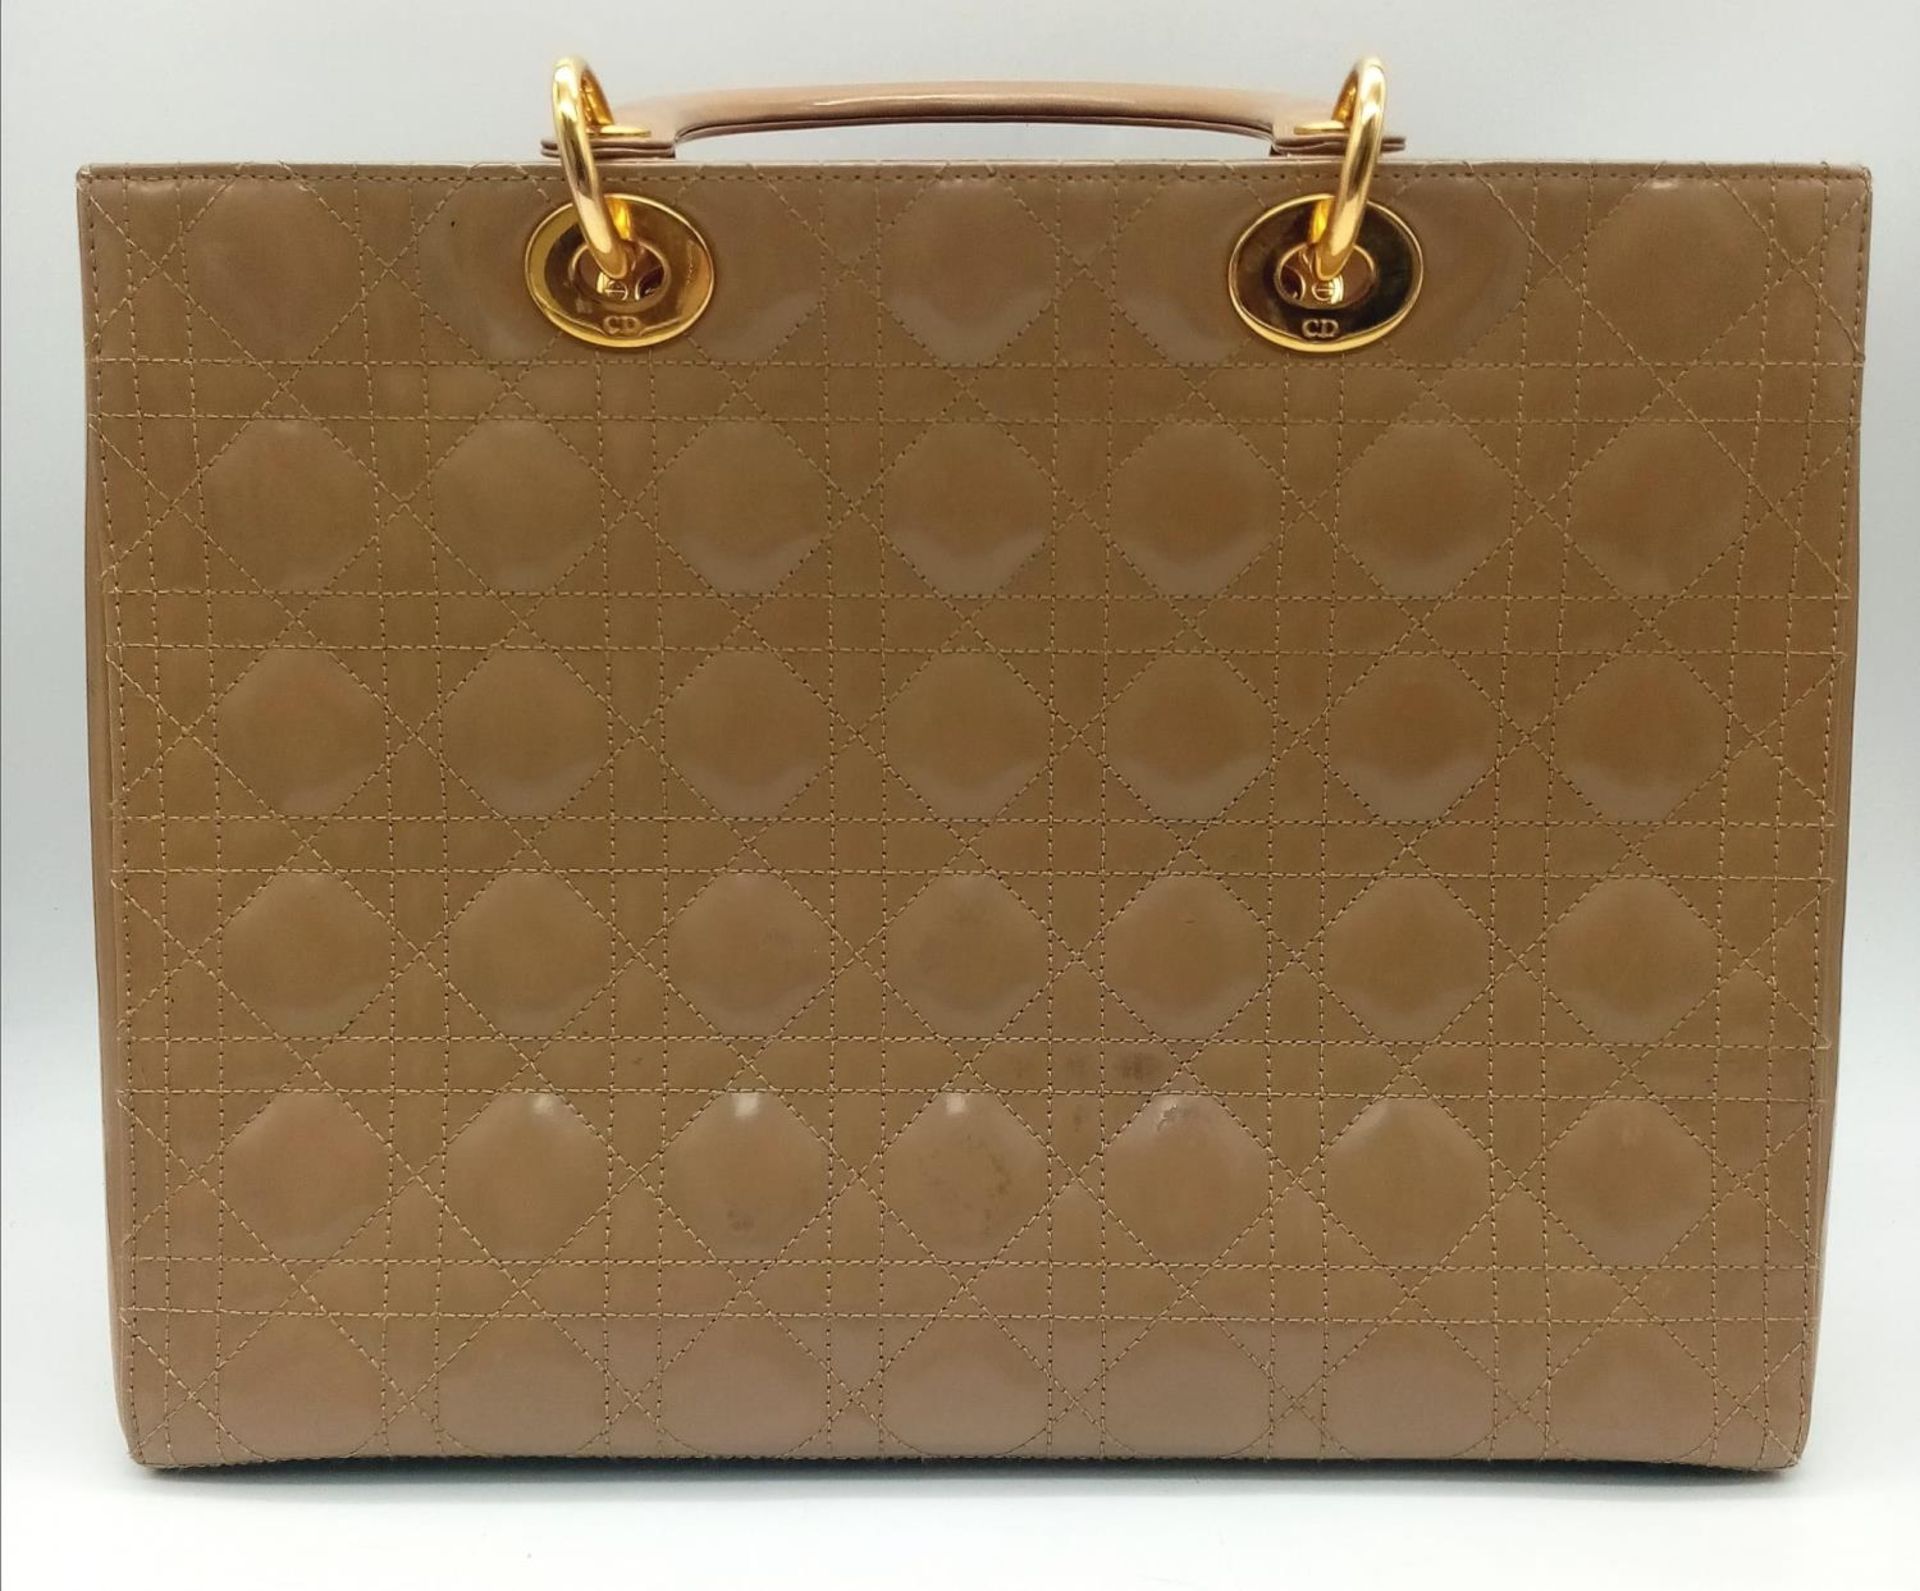 A Christian Dior Large Lady 'Diana' Dior Bag, quilted patent leather with gold tone hardware and - Image 4 of 17